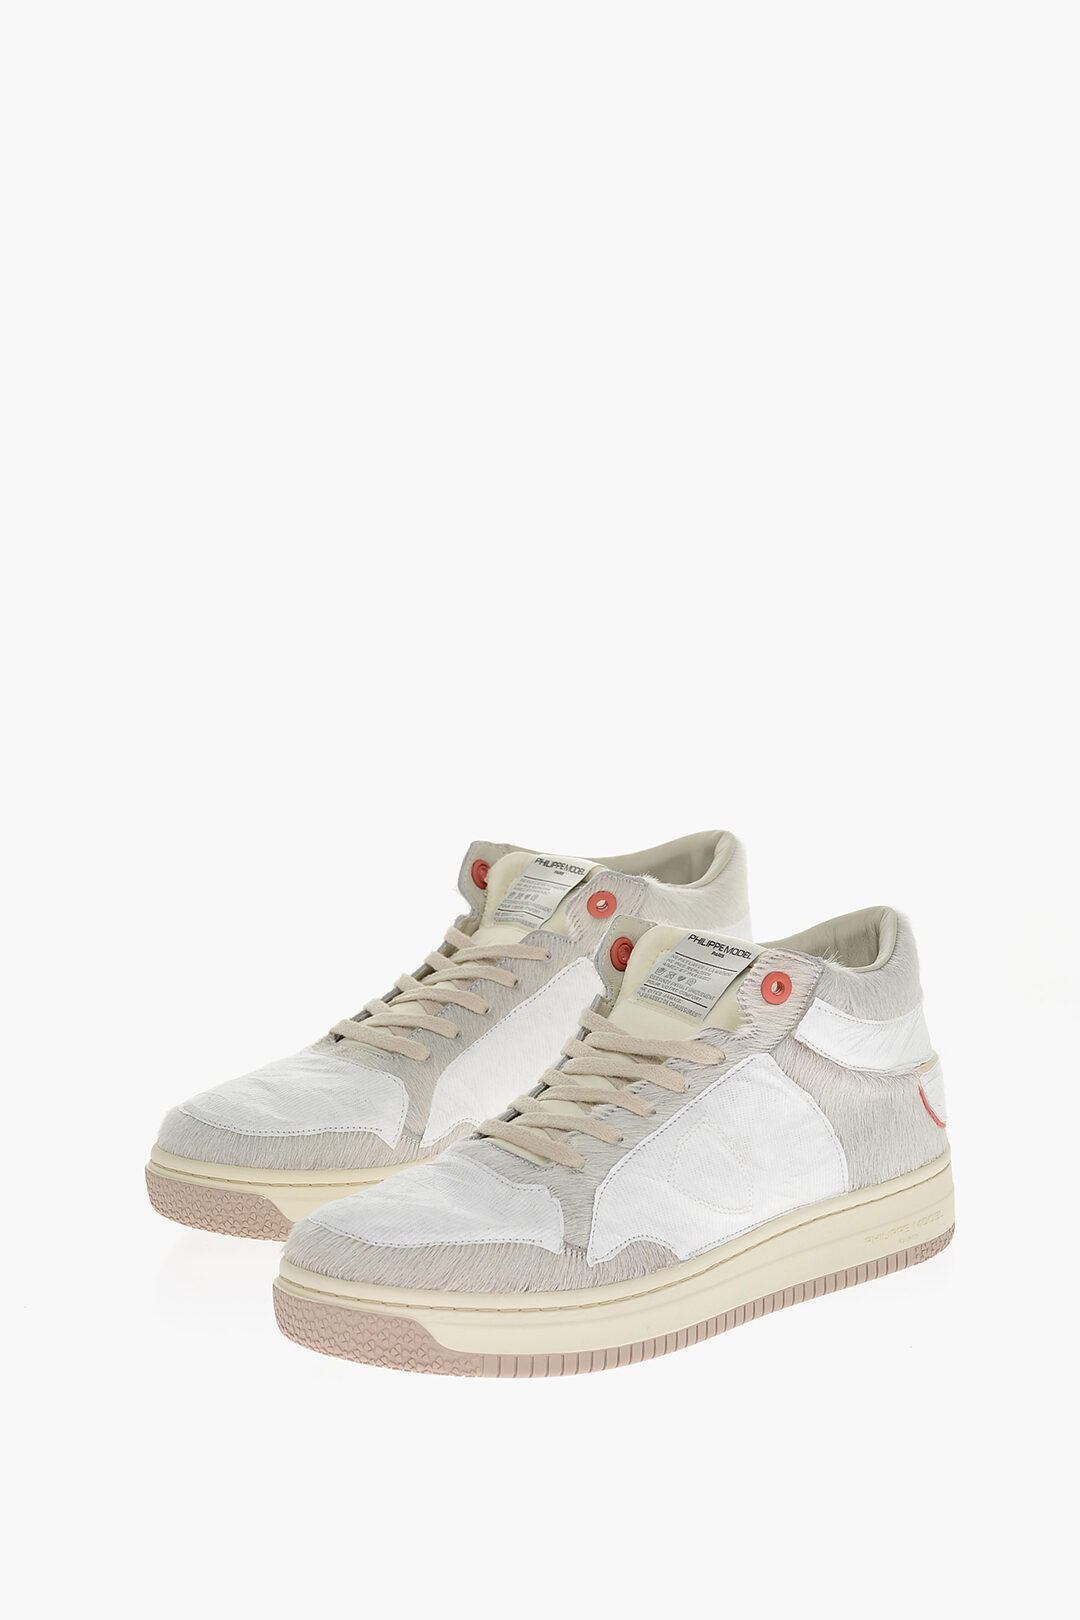 Maison Martin Margiela Dropped a Pony Hair Sneaker for the Yeezus Tour |  Complex